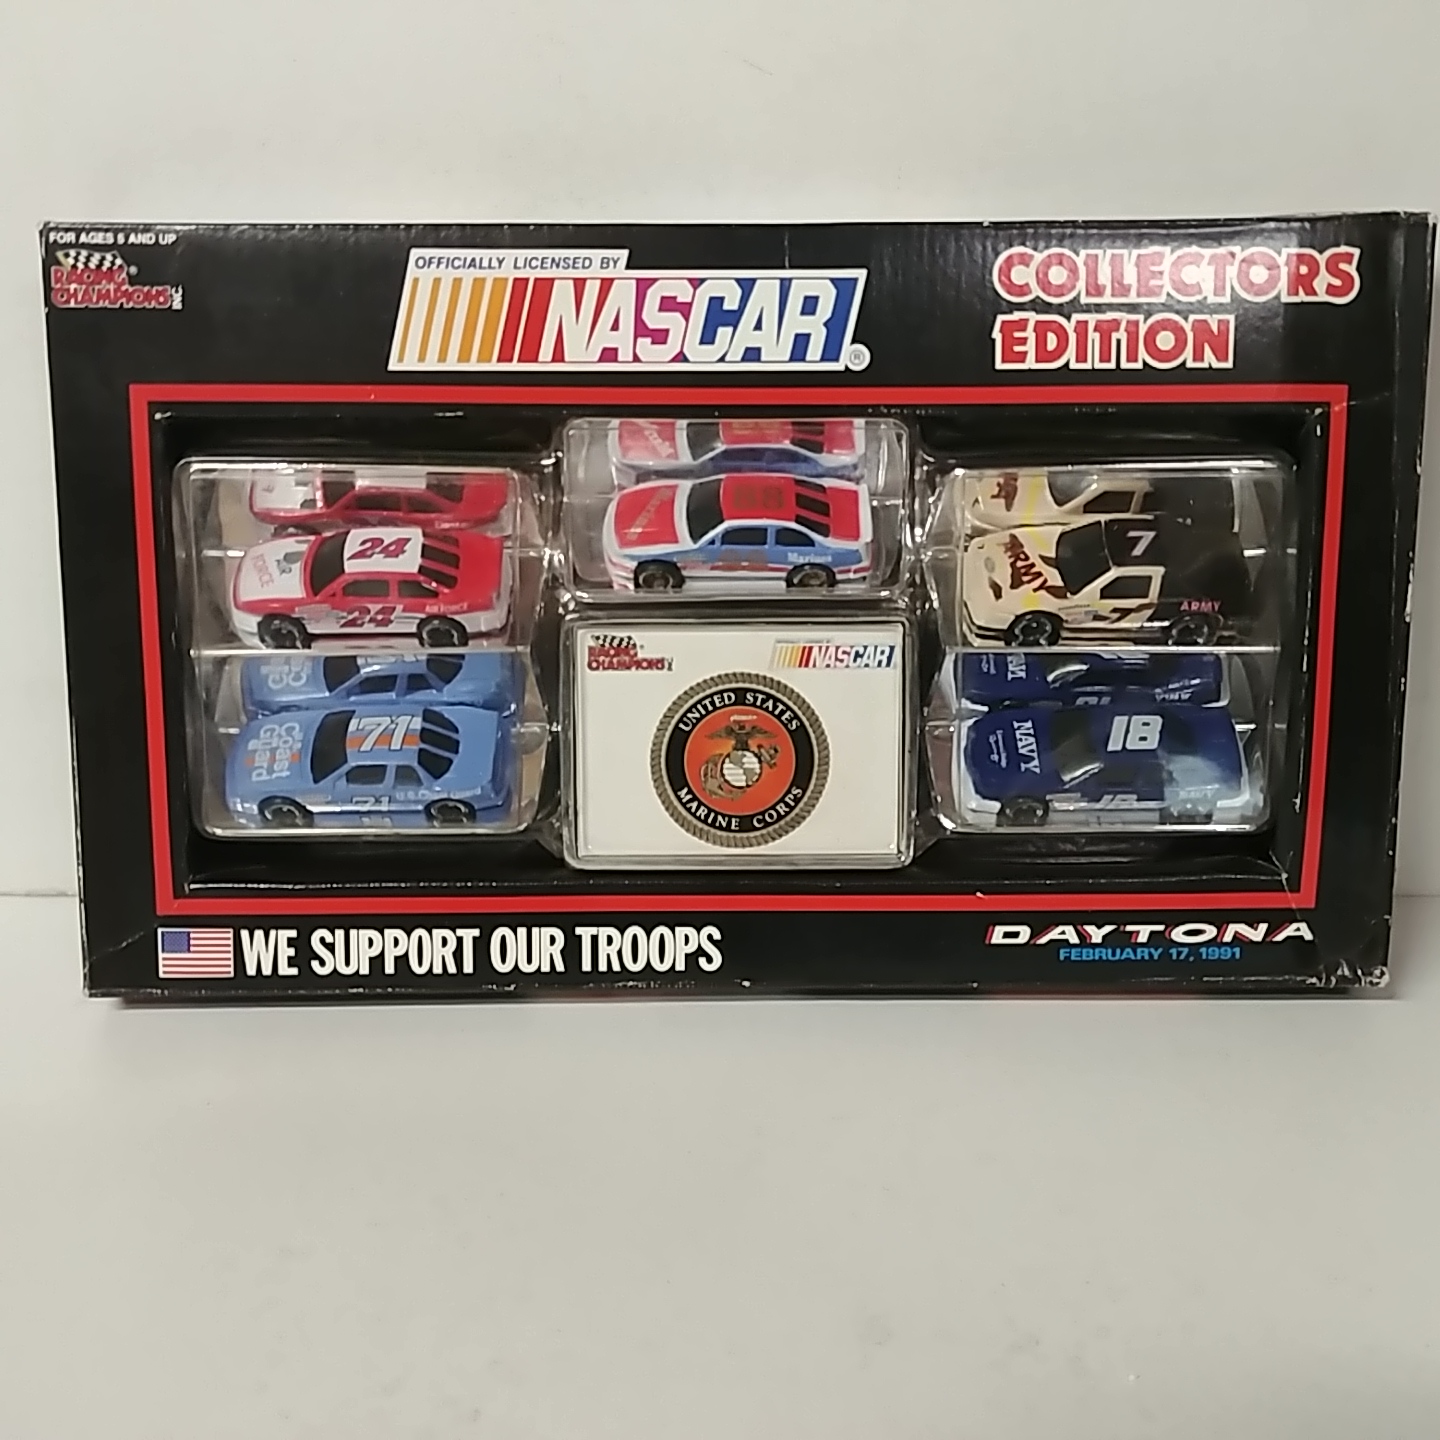 1991 Military "We Support Our Troops" 5 car set